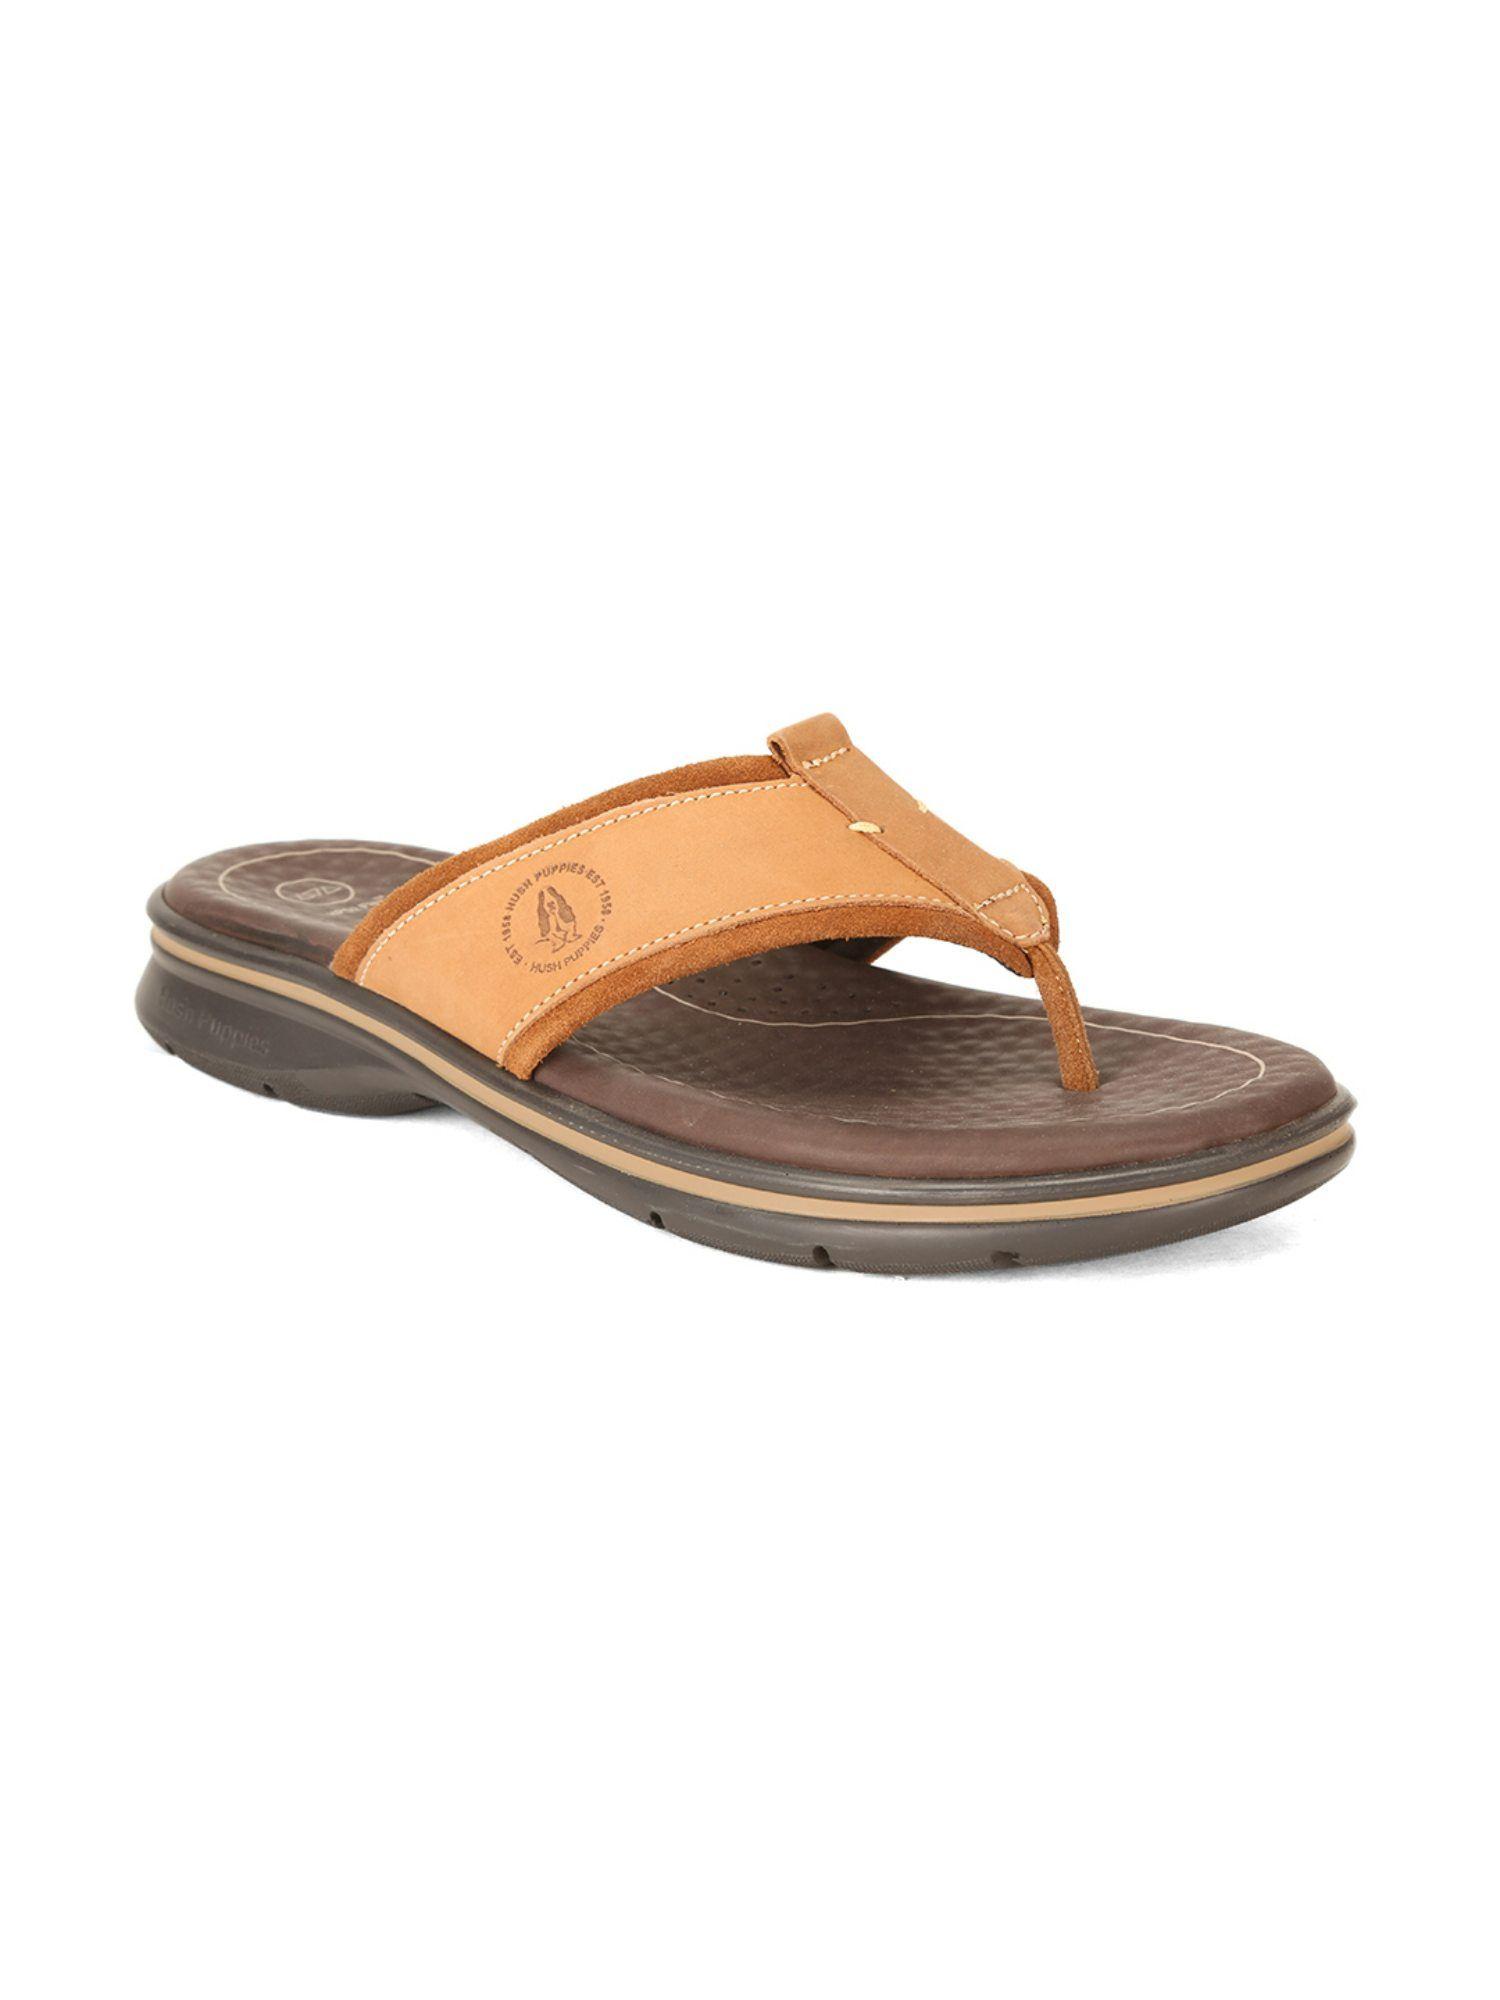 solid-brown-sandals